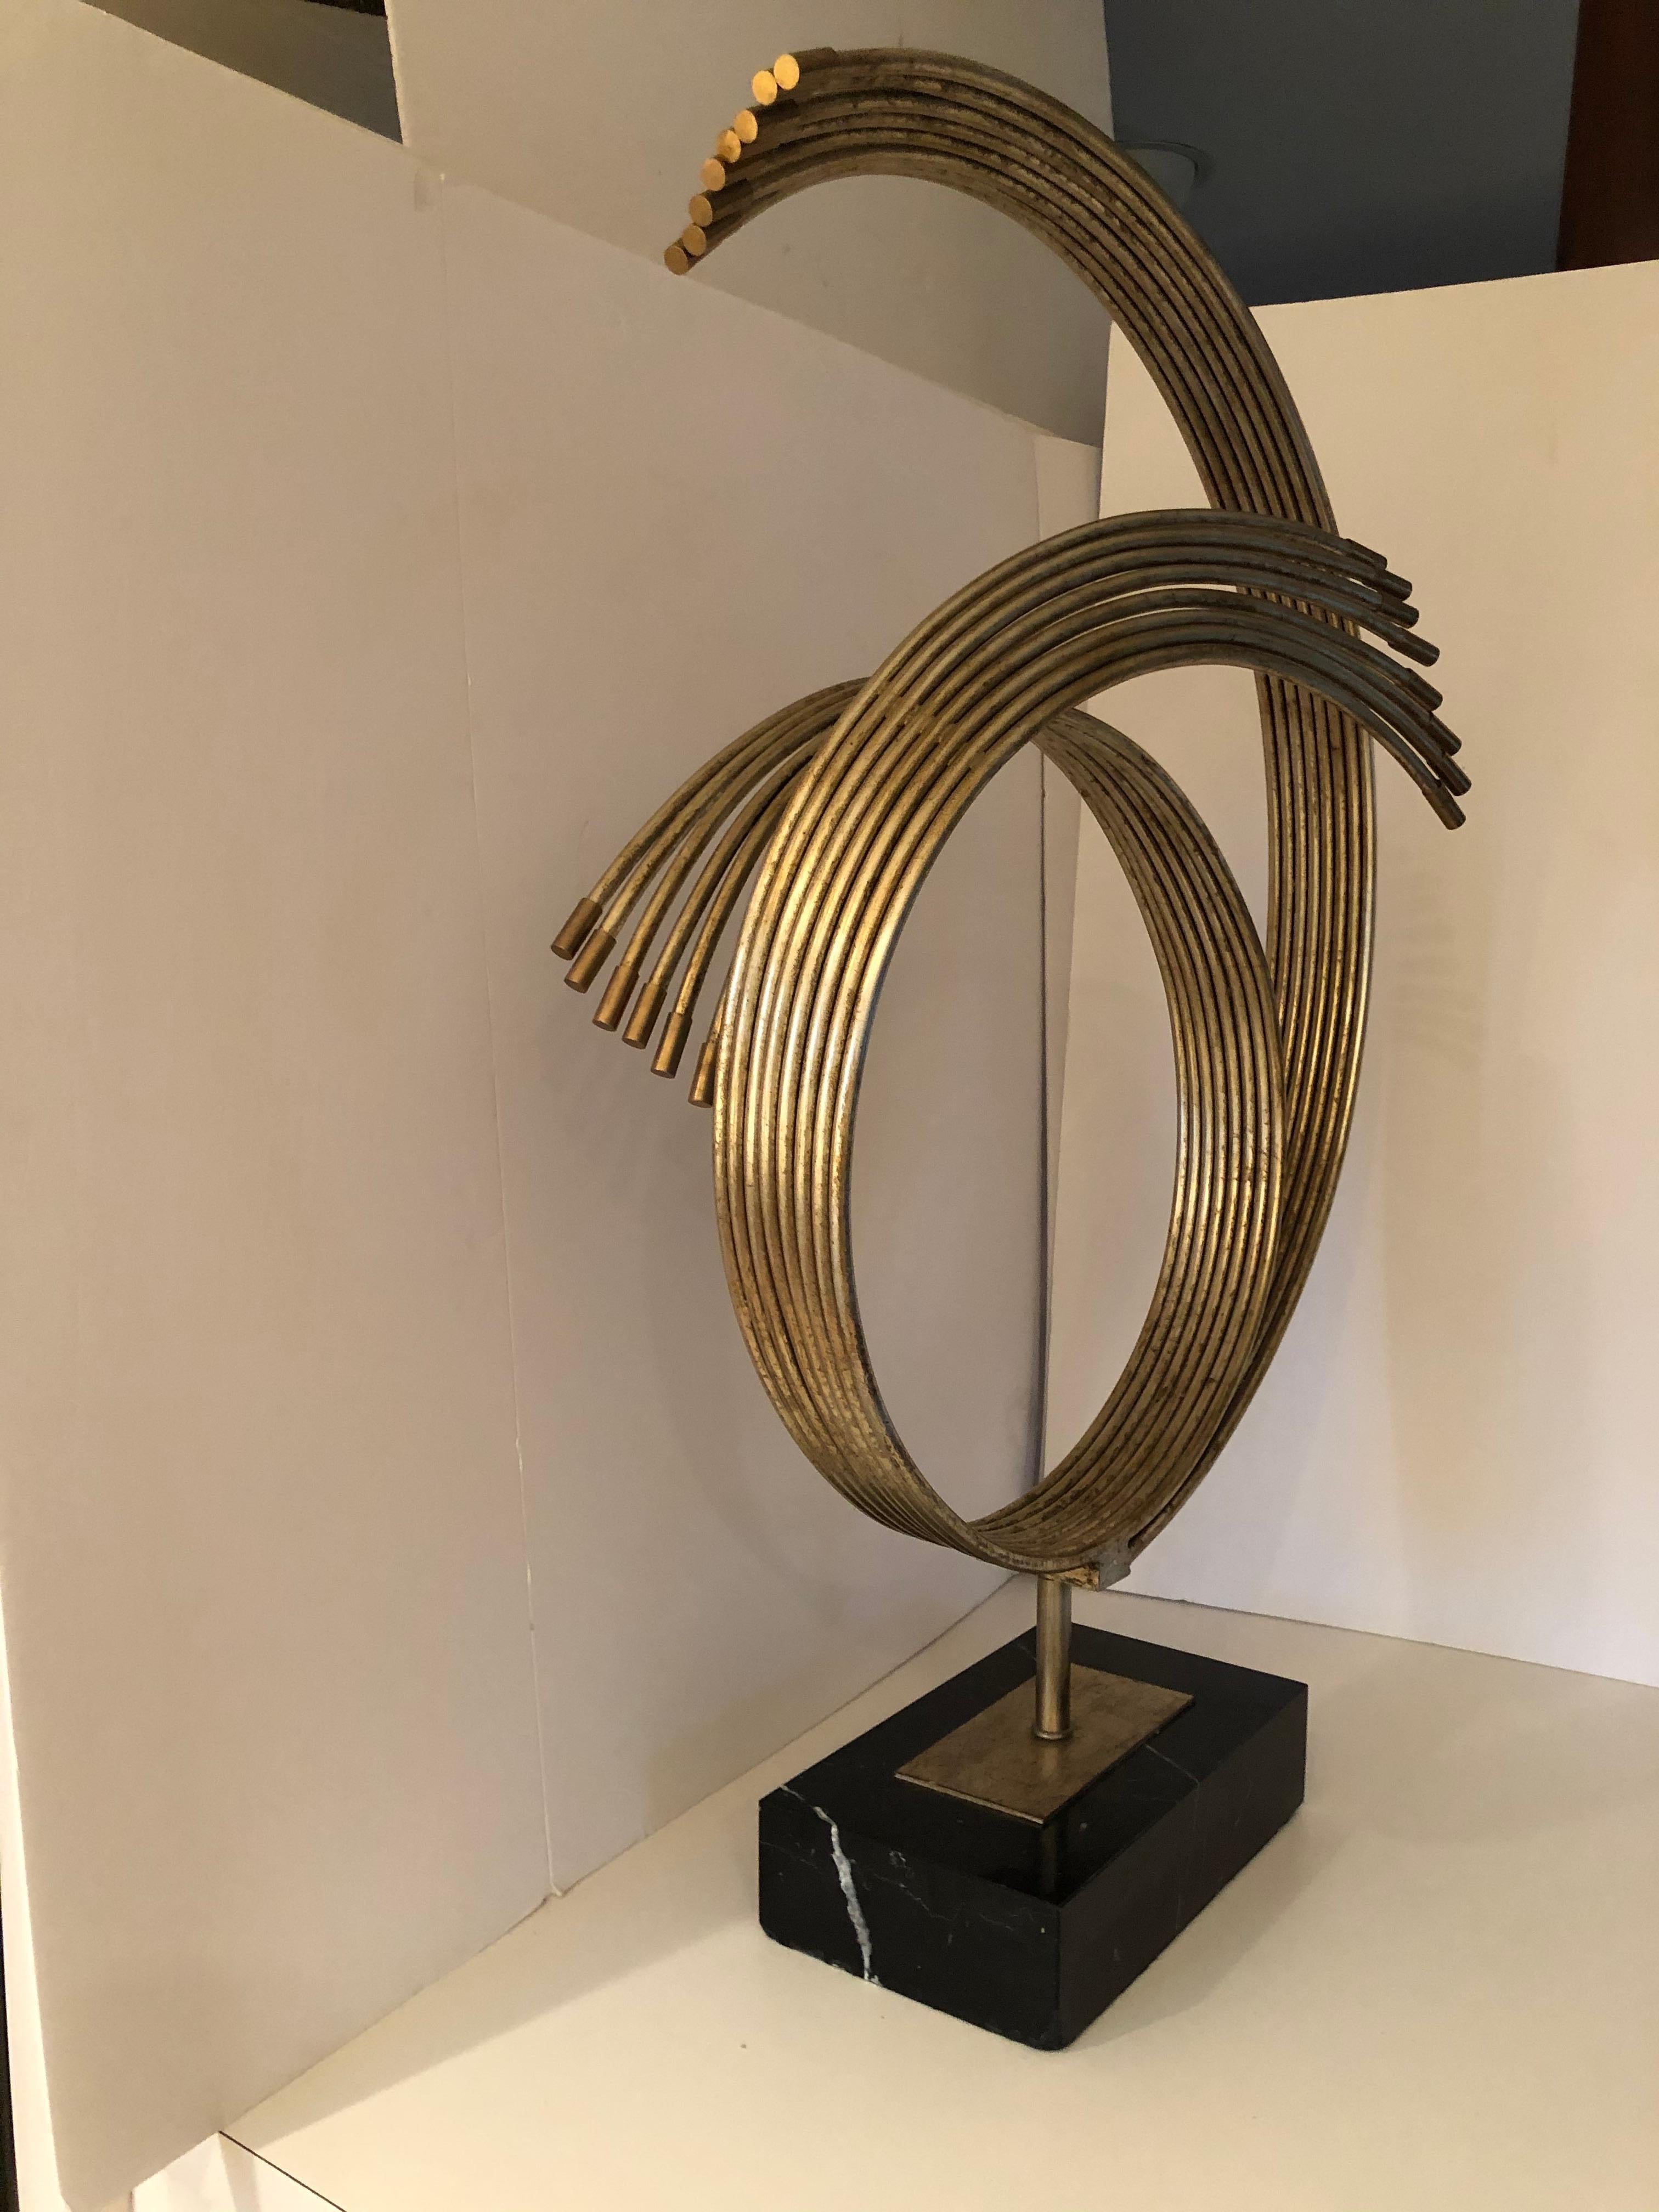 A dramatic Mid-Century Modern sculpture by renowned artist, Curtis Jere. The brass sculpture has great size and movement and is mounted on a black marble base.